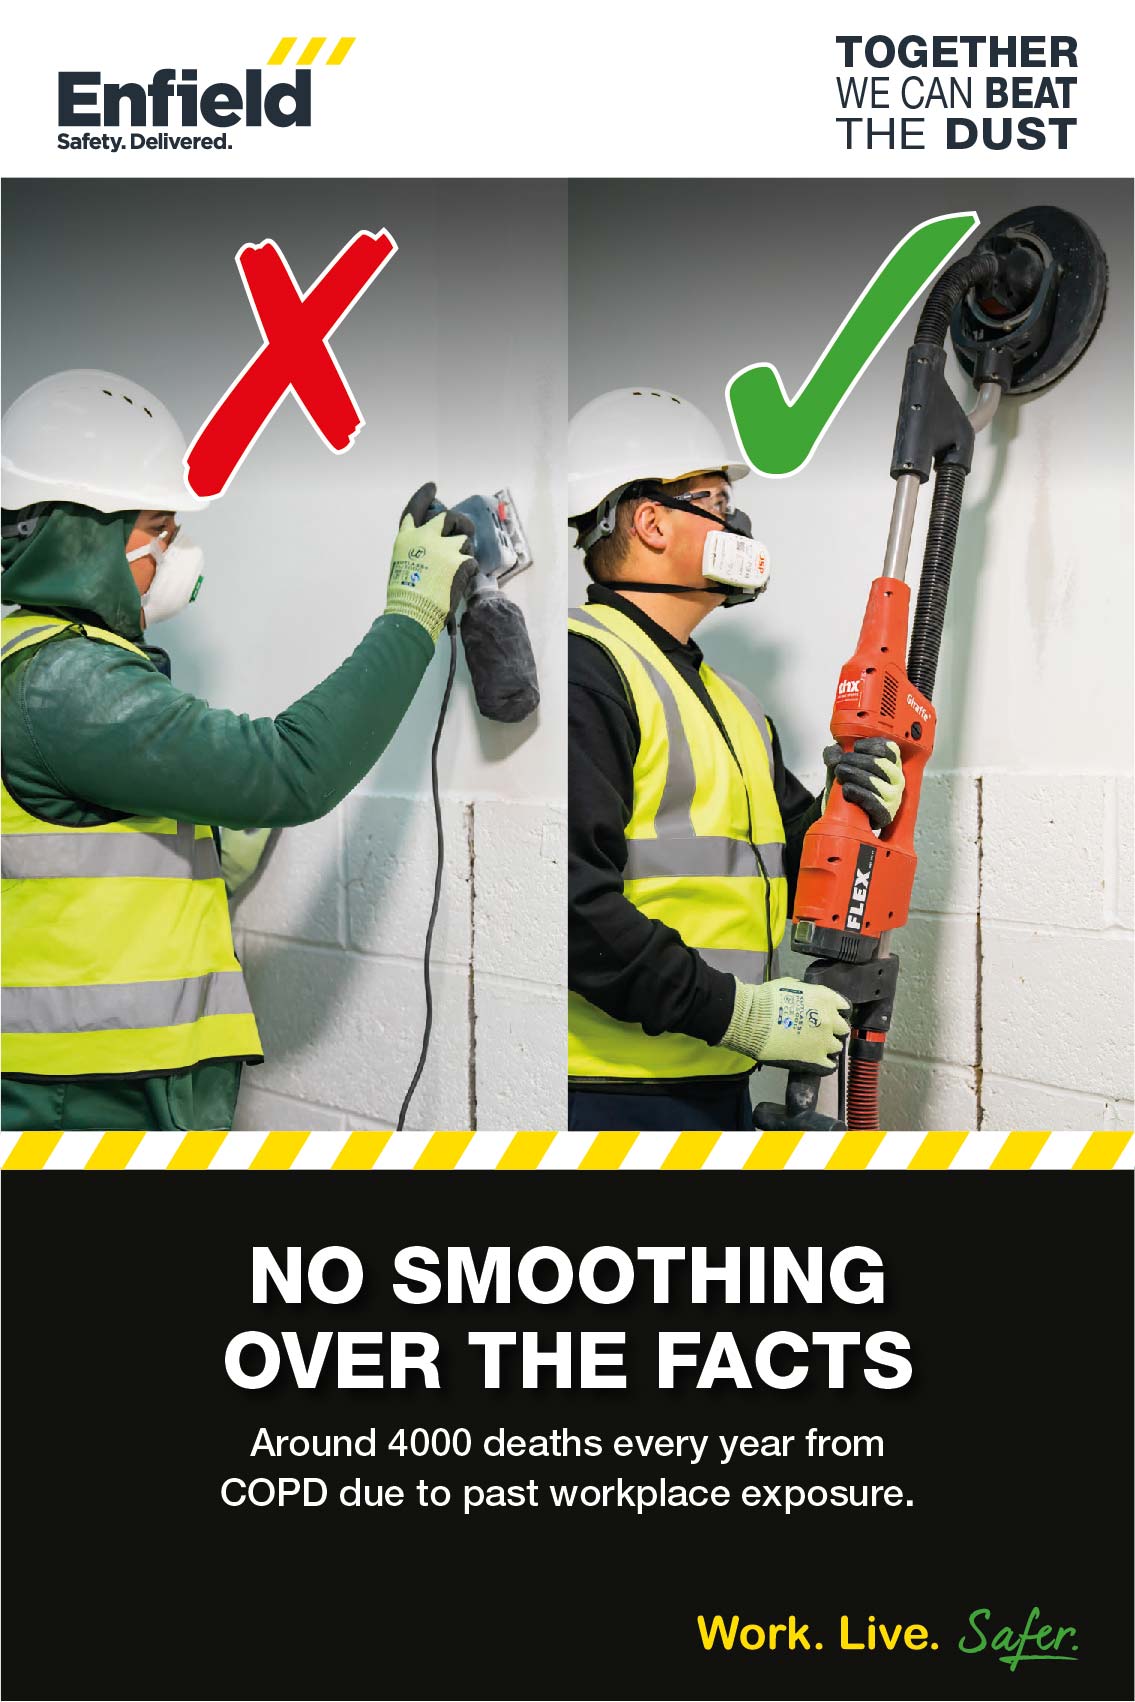 Enfield Dust Safety Poster 3